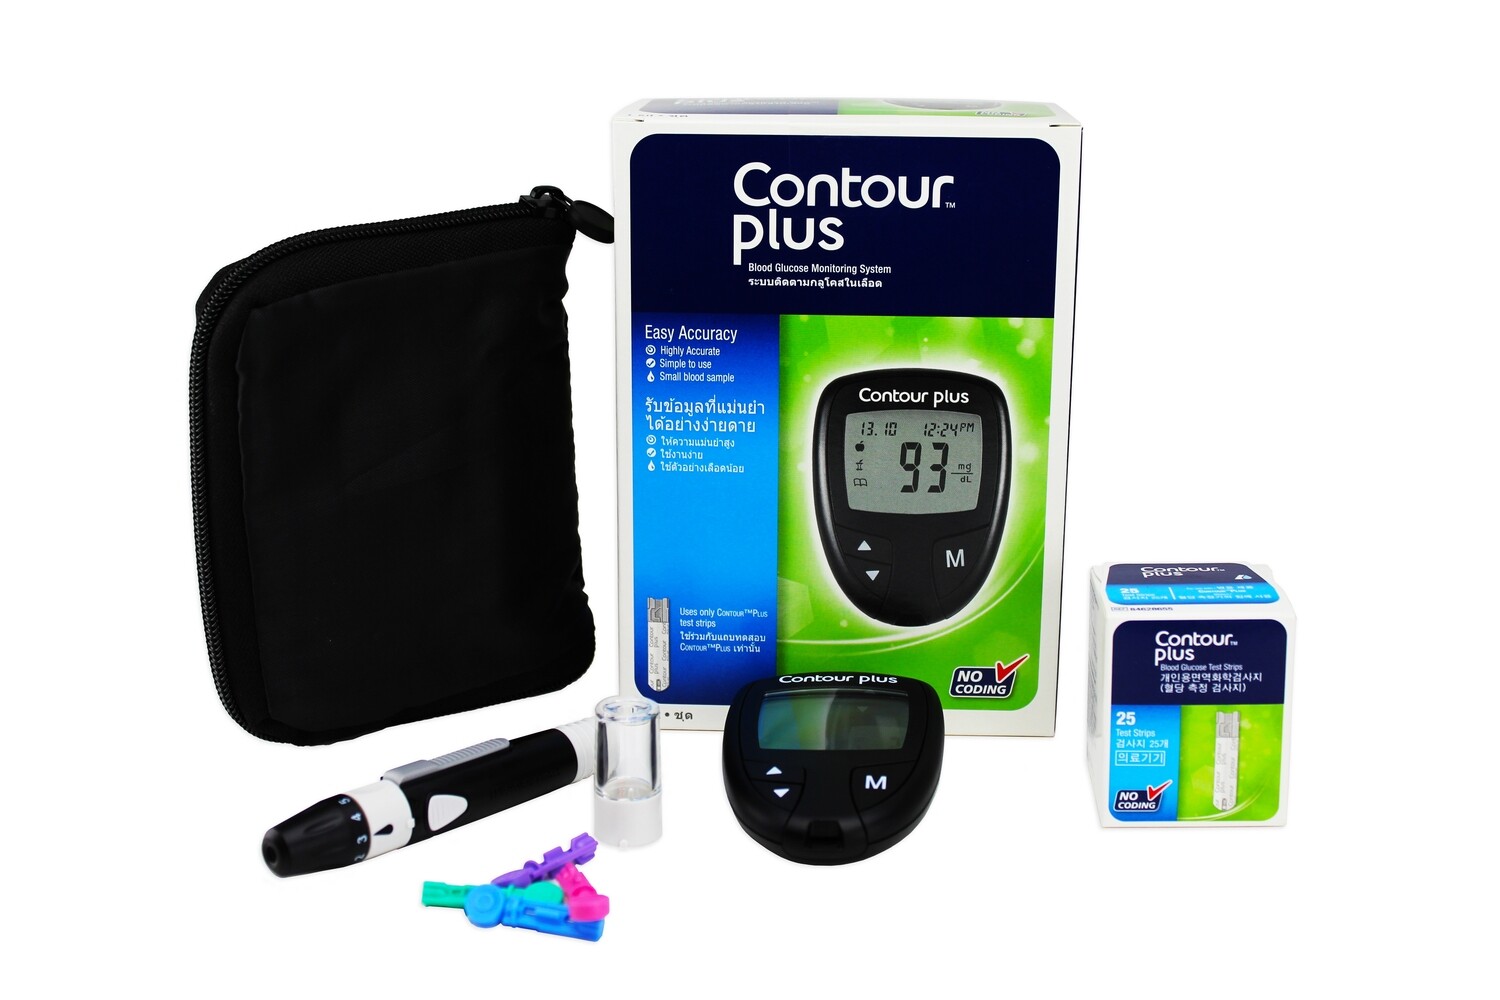 blood-glucose-monitoring-system-contour-plus-ascensia-with-free